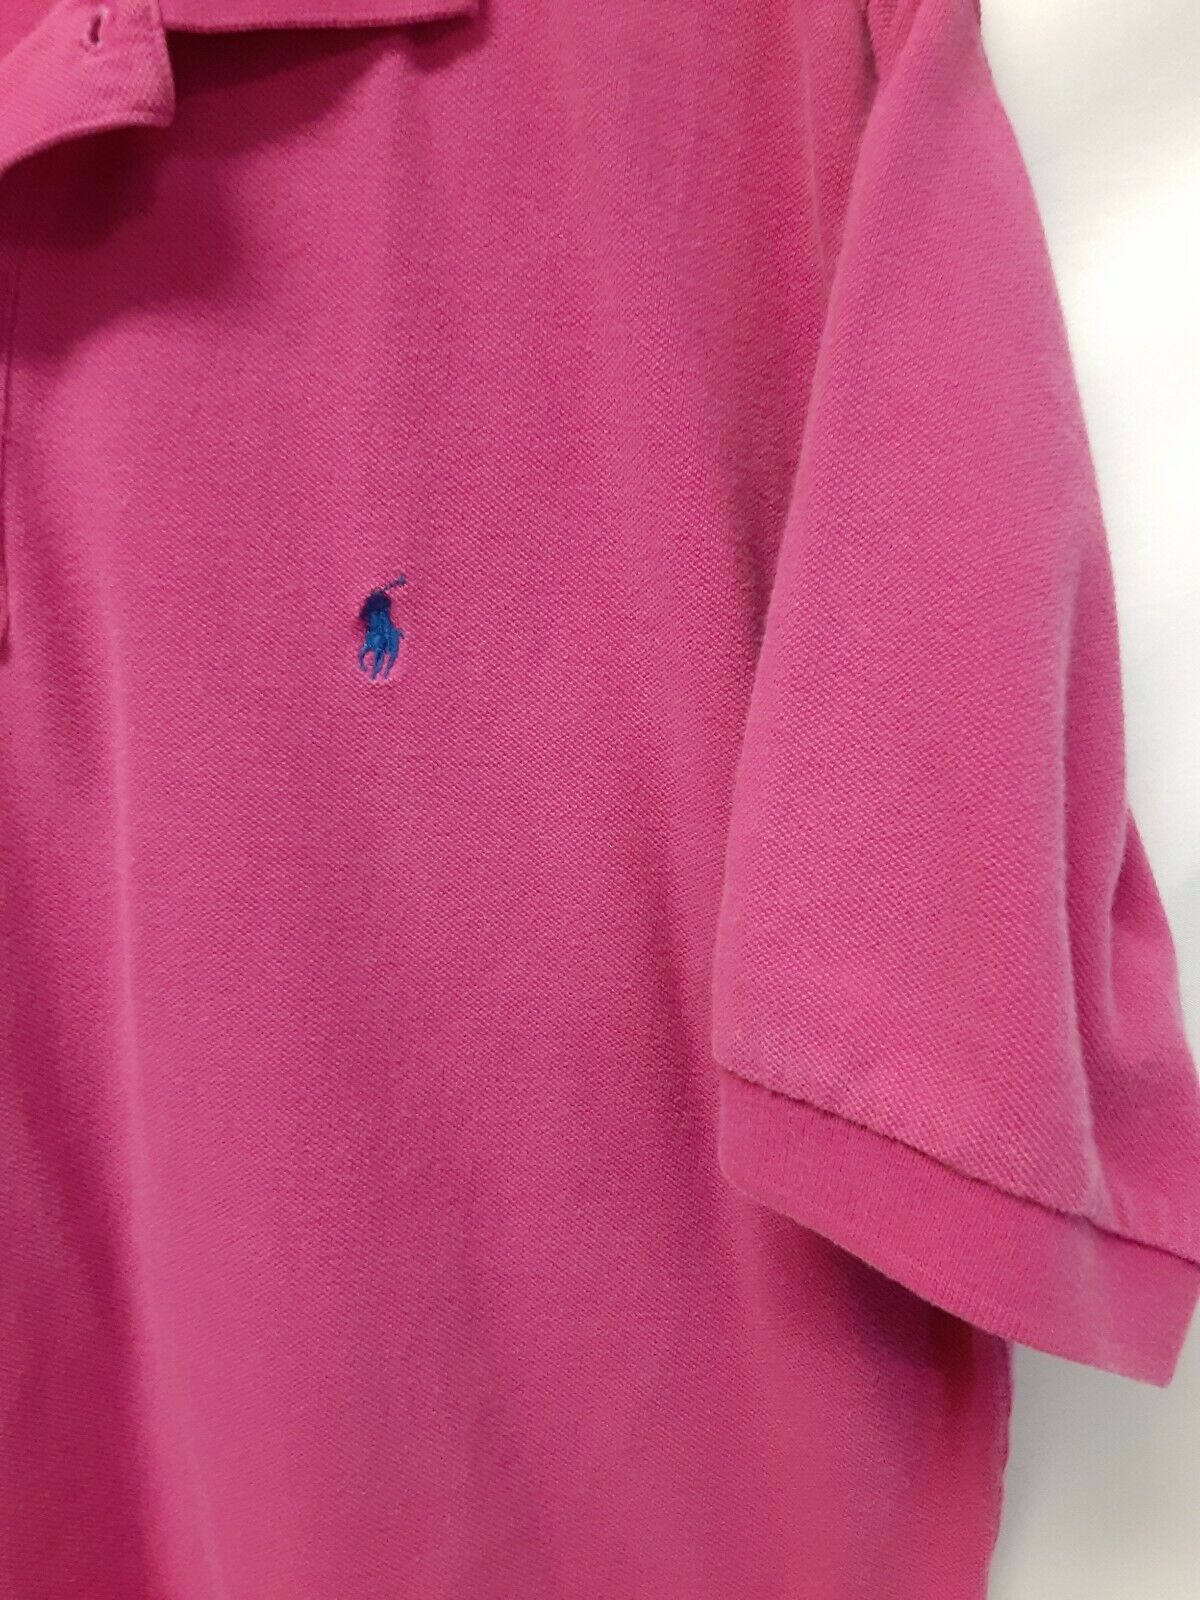 POLO by Ralph Lauren VTG 90s Pink Polo Shirt Large